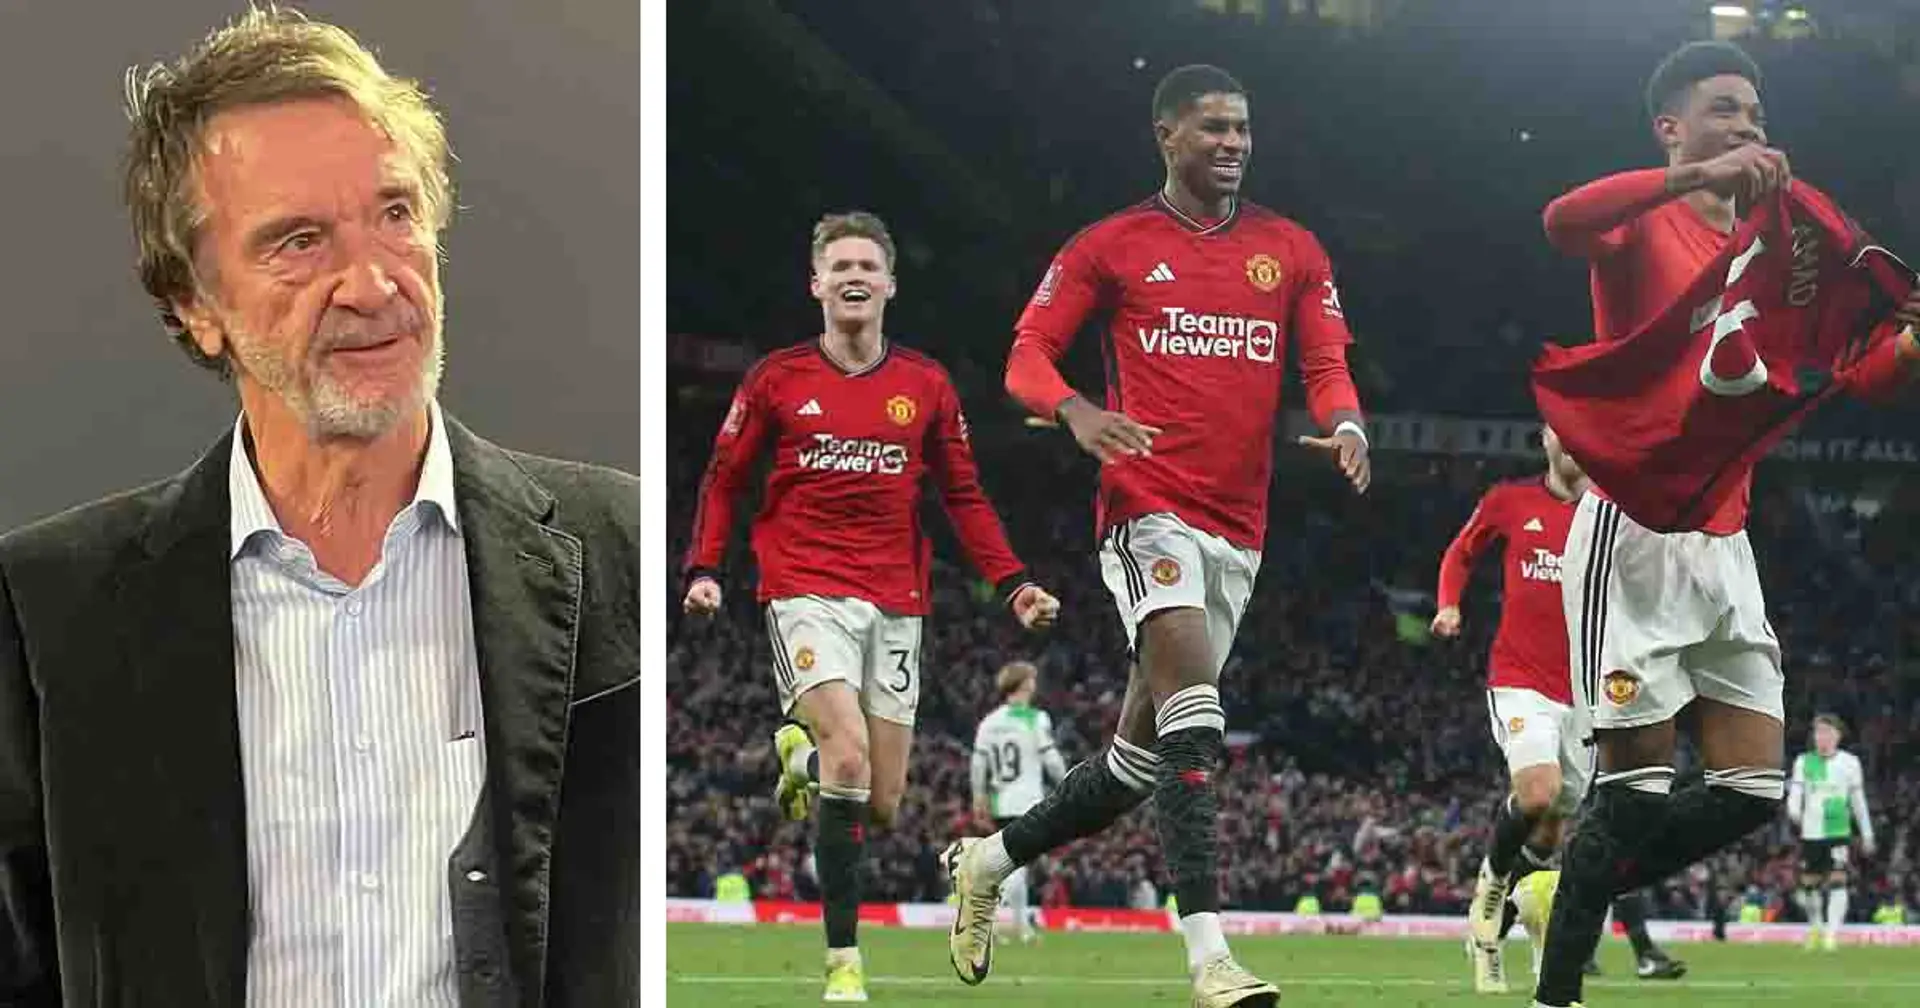 Sir Jim ready to reward one Man United star with new contract after impressive performances